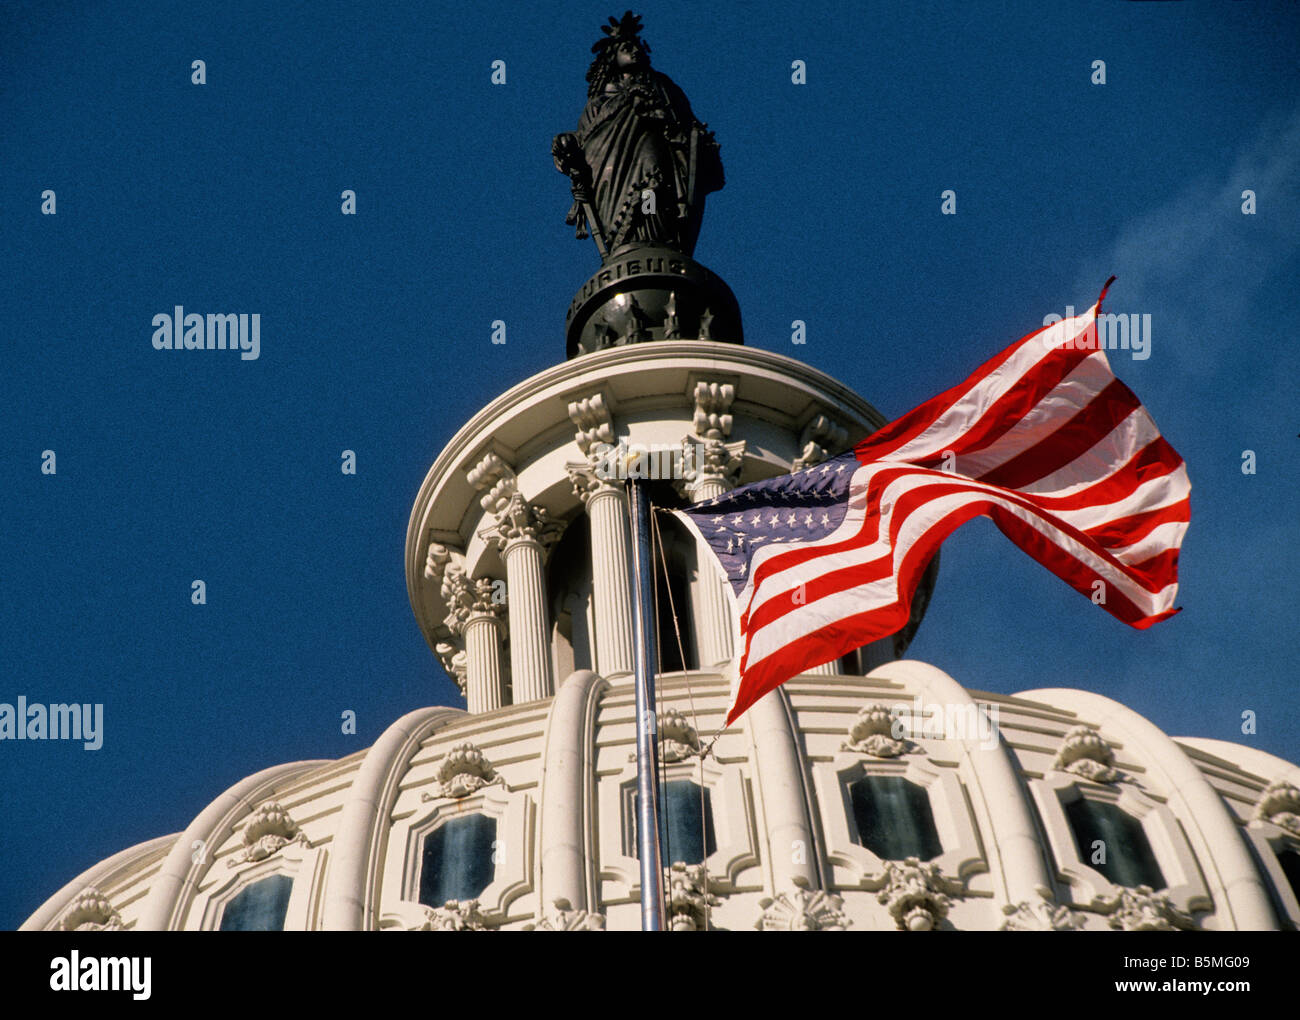 Capitol Building Washington DC. The Statue of Freedom, American Flag and Capitol Dome are an integral part of the government building. USA Stock Photo